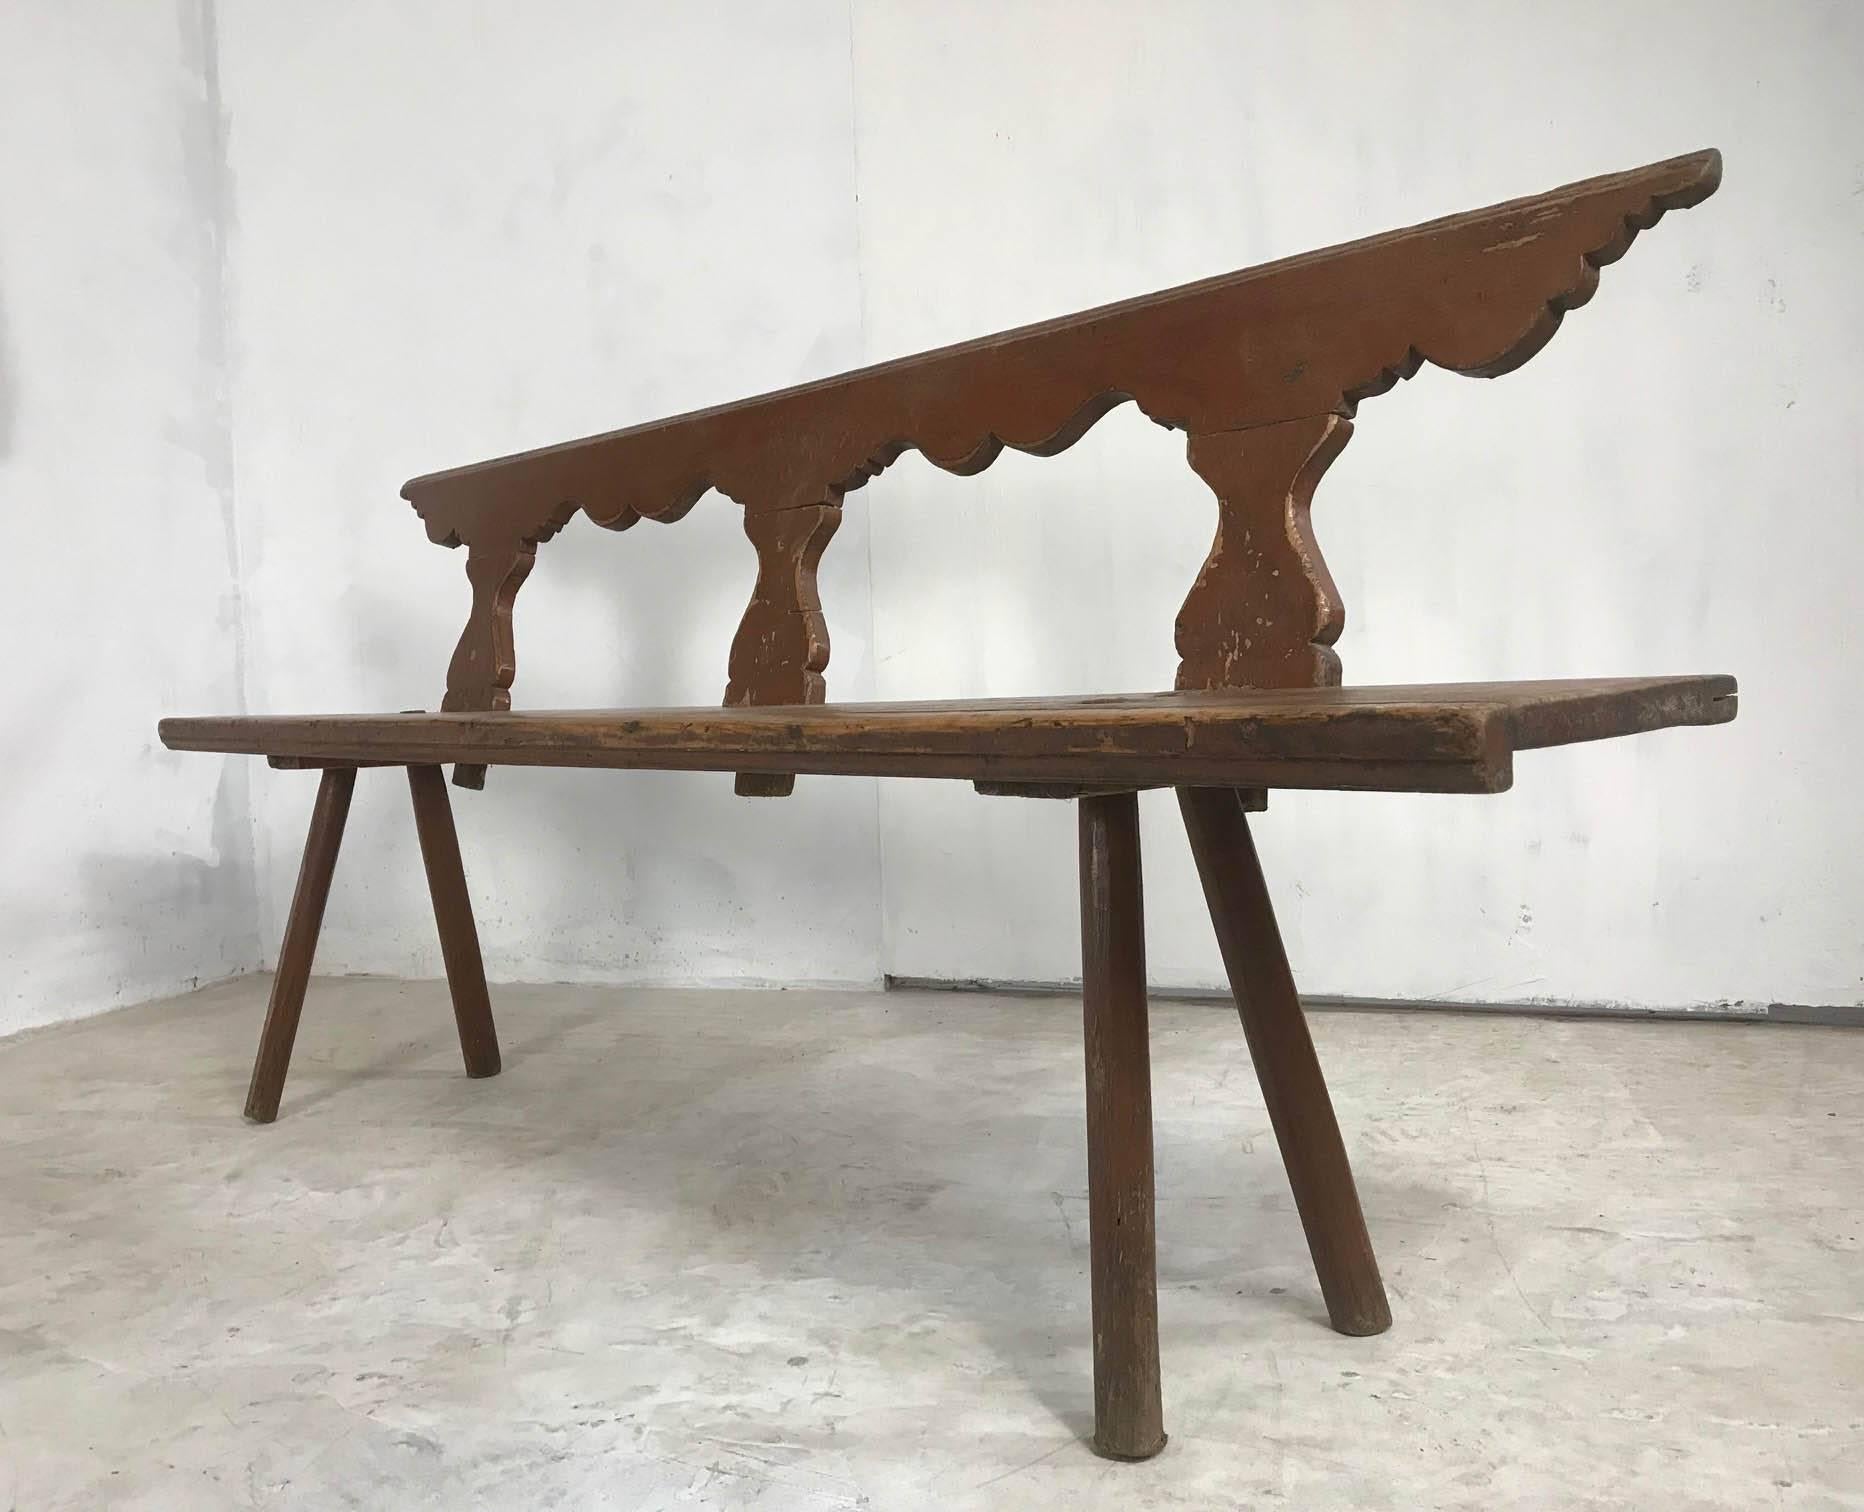 Beautiful pine bench with original brown paint which has worn away on the seat to produce a nice patina.
Great for hallway or seating at dining table.
Measurements: 188cm long x 34 cm wide x 83 cm high 
Seat height 49cm.